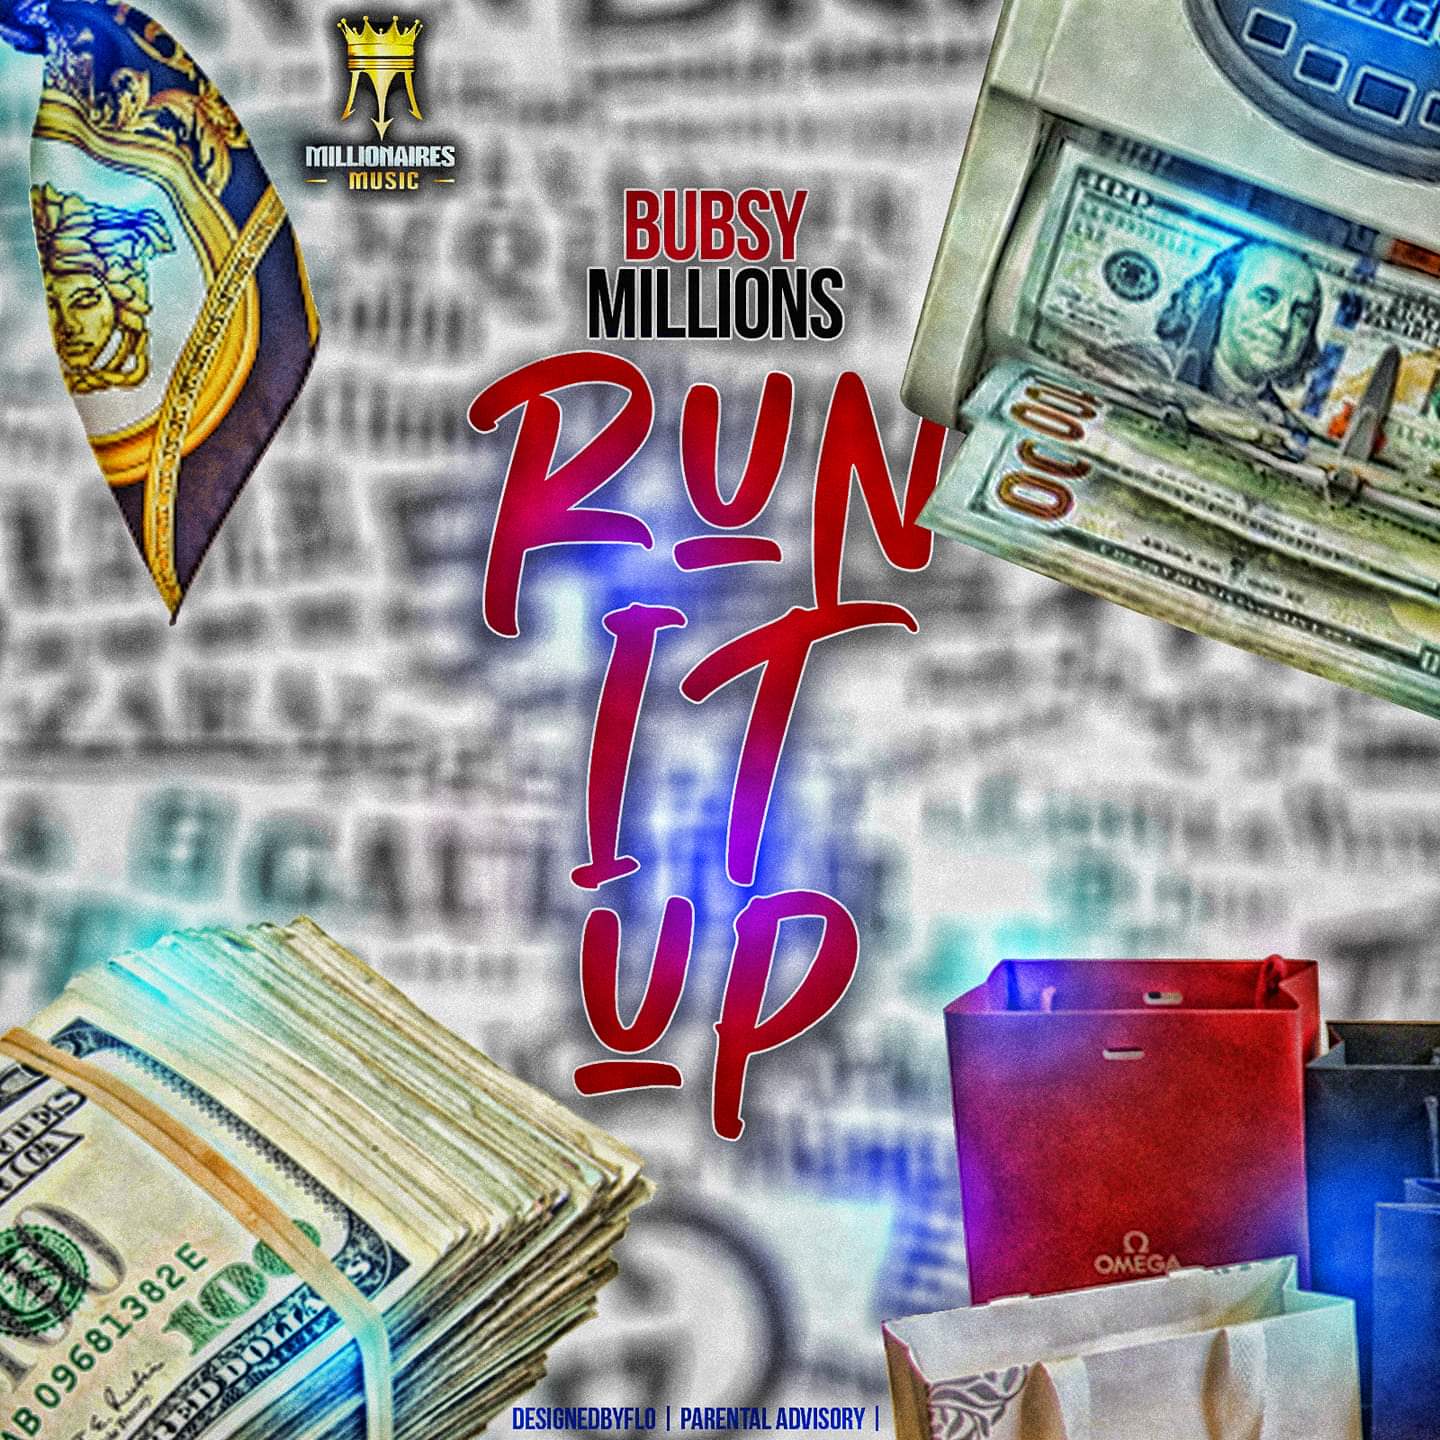 Bubsy Millions on his Ignant on his new single “Run it Up” @bubsymillions